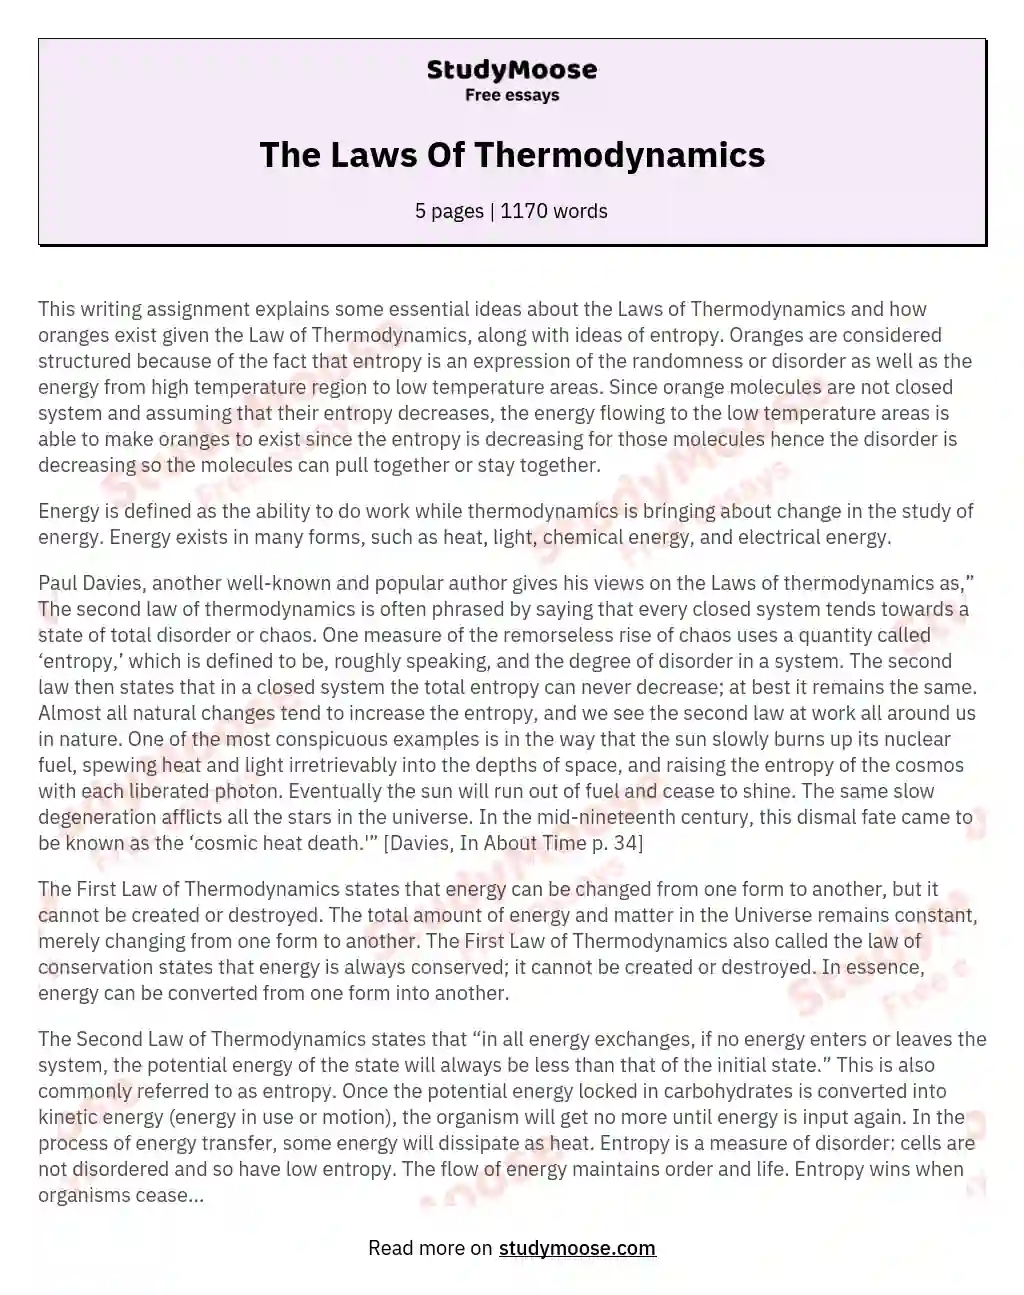 The Laws Of Thermodynamics essay